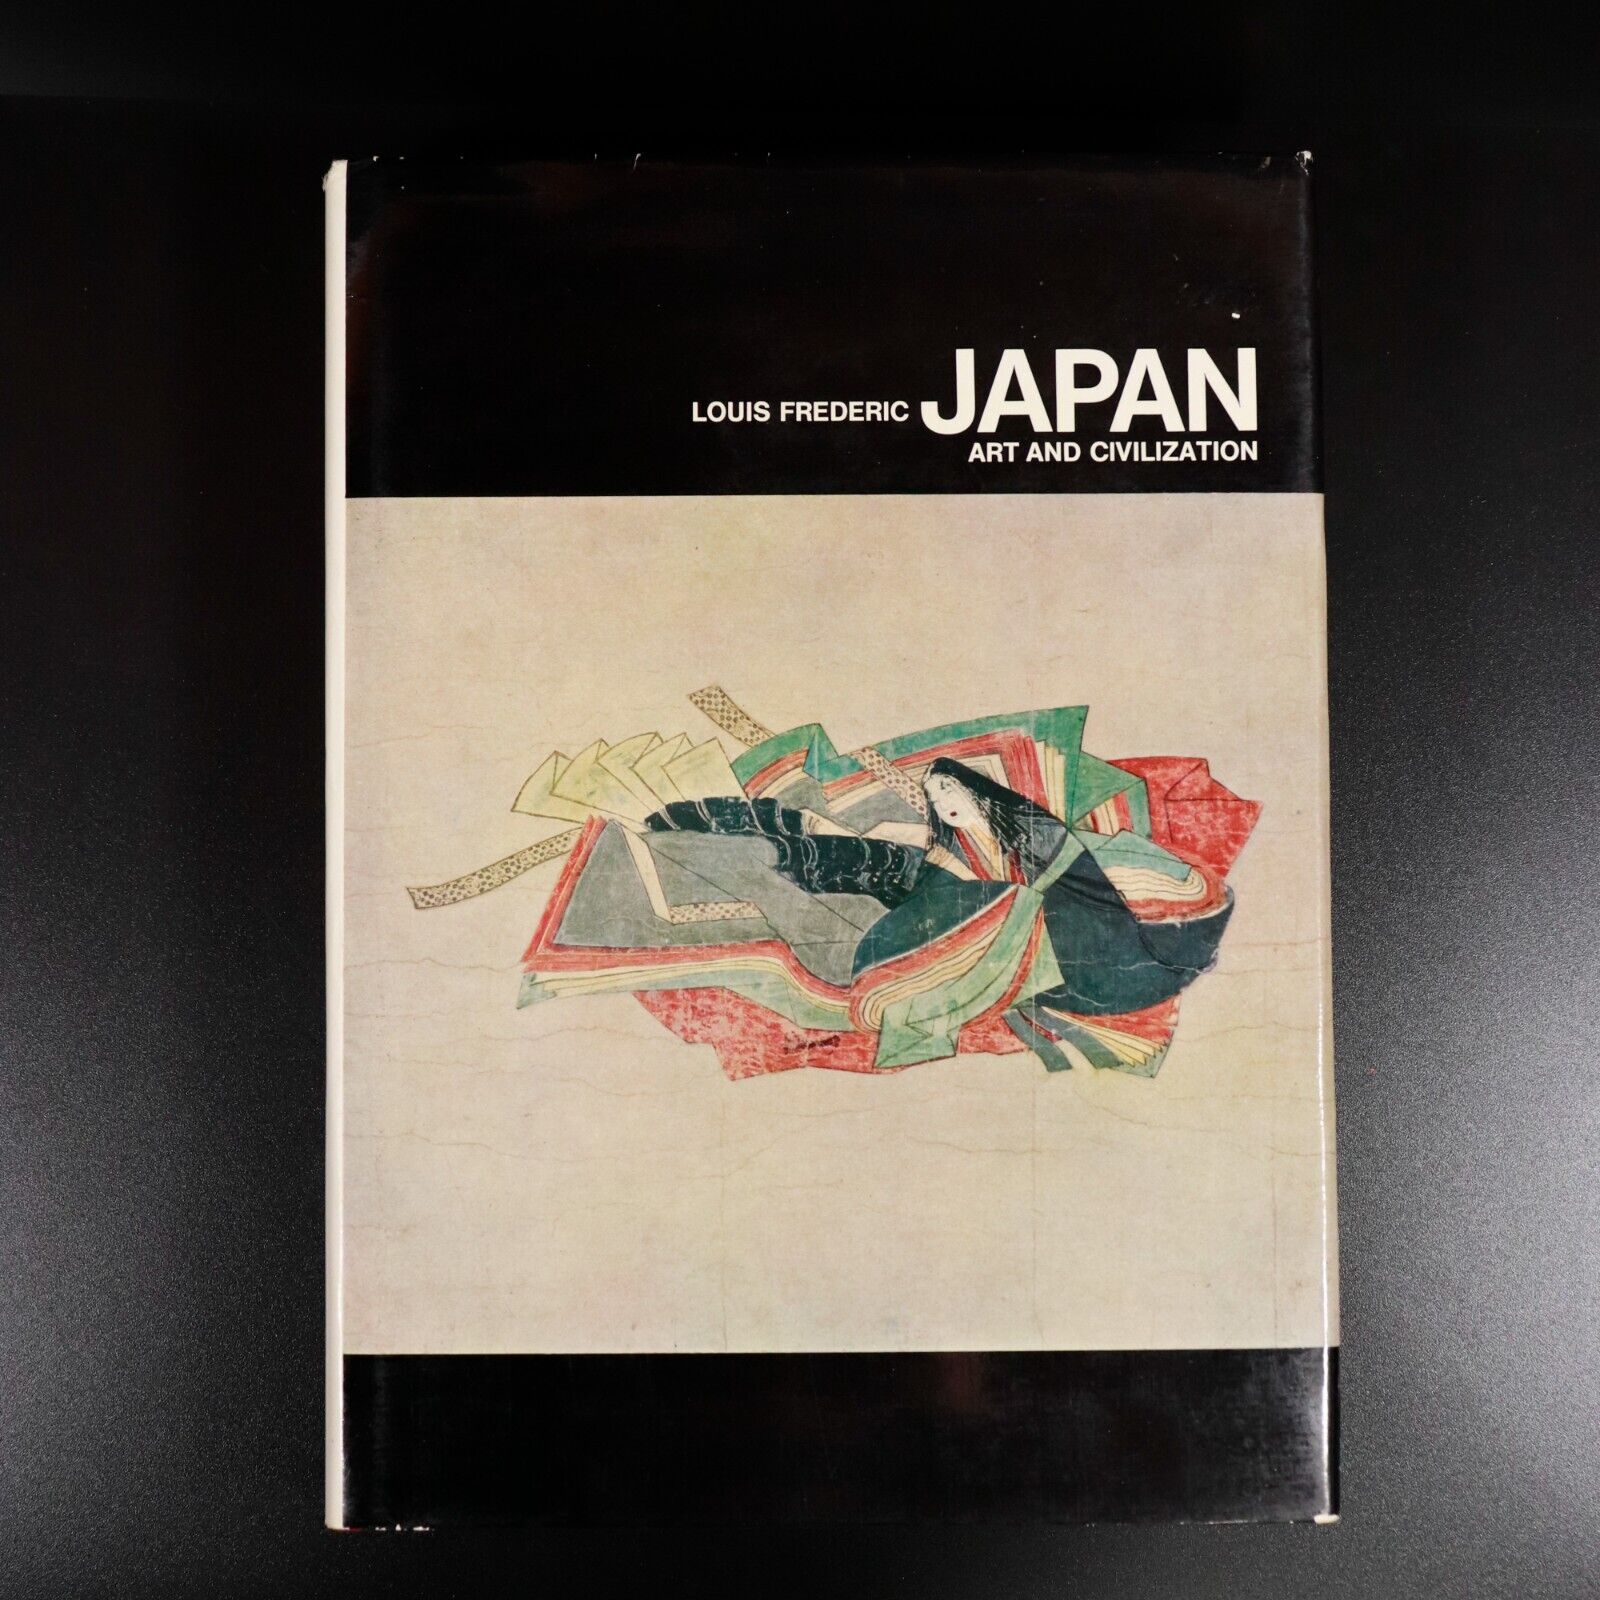 1971 Japan: Art & Civilization by Louis Frederic Japanese History Book